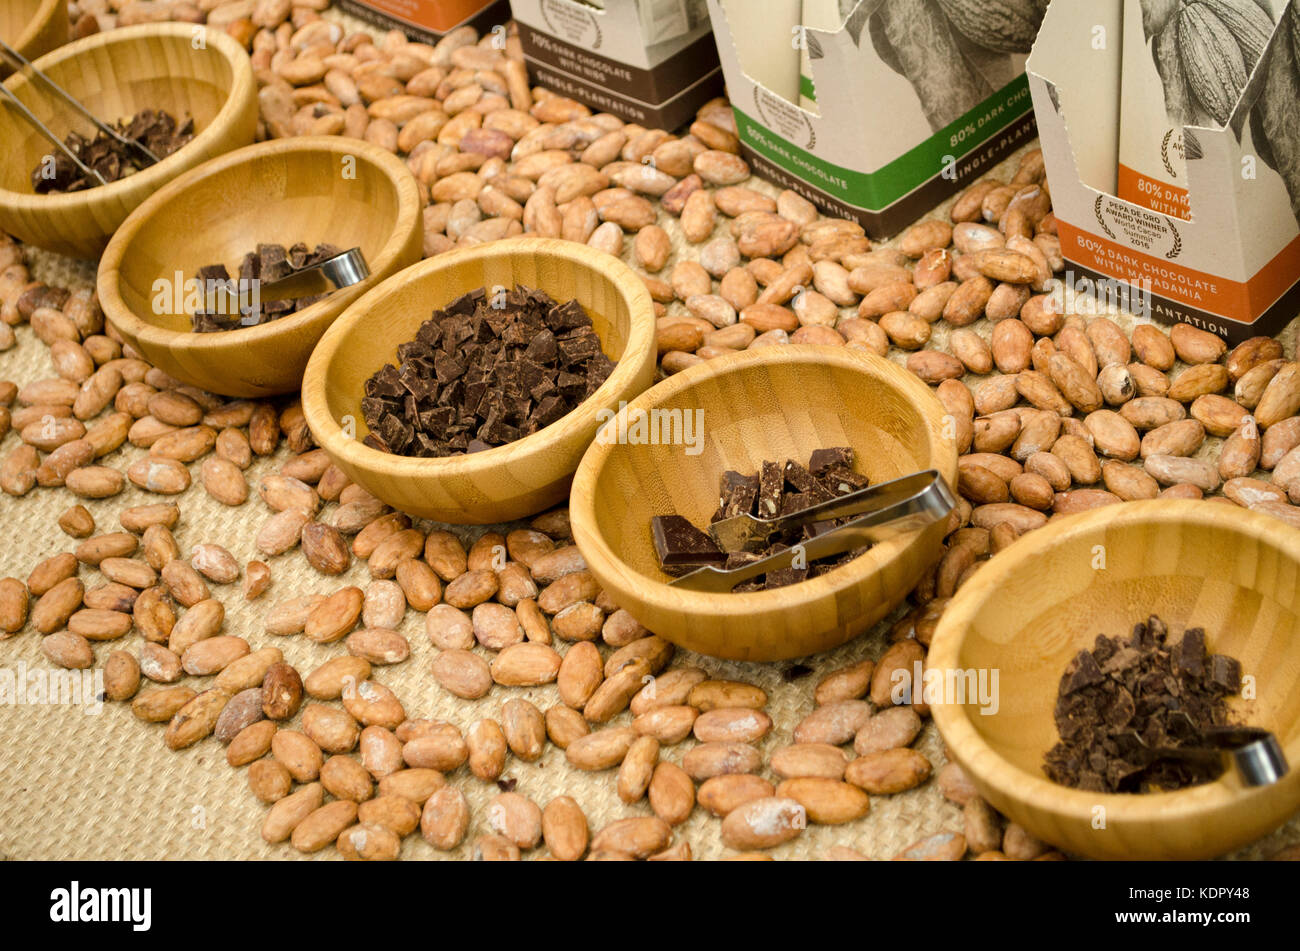 Ecuadorian chocolate samples at the Chocolate Show 2017. Chocolate fans descended en masse for The Chocolate Show, 13th-15th October 2017, at Olympia, London, UK, which ended today. Featuring a wide range of exhibitors selling everything chocolate from around the world, tastings, demonstrations by leading chefs and chocolatiers, and chocolate art and fashion displays, the show experienced high visitor numbers across all three days. 15th October 2017. Credit: Antony Nettle/Alamy Live News Stock Photo